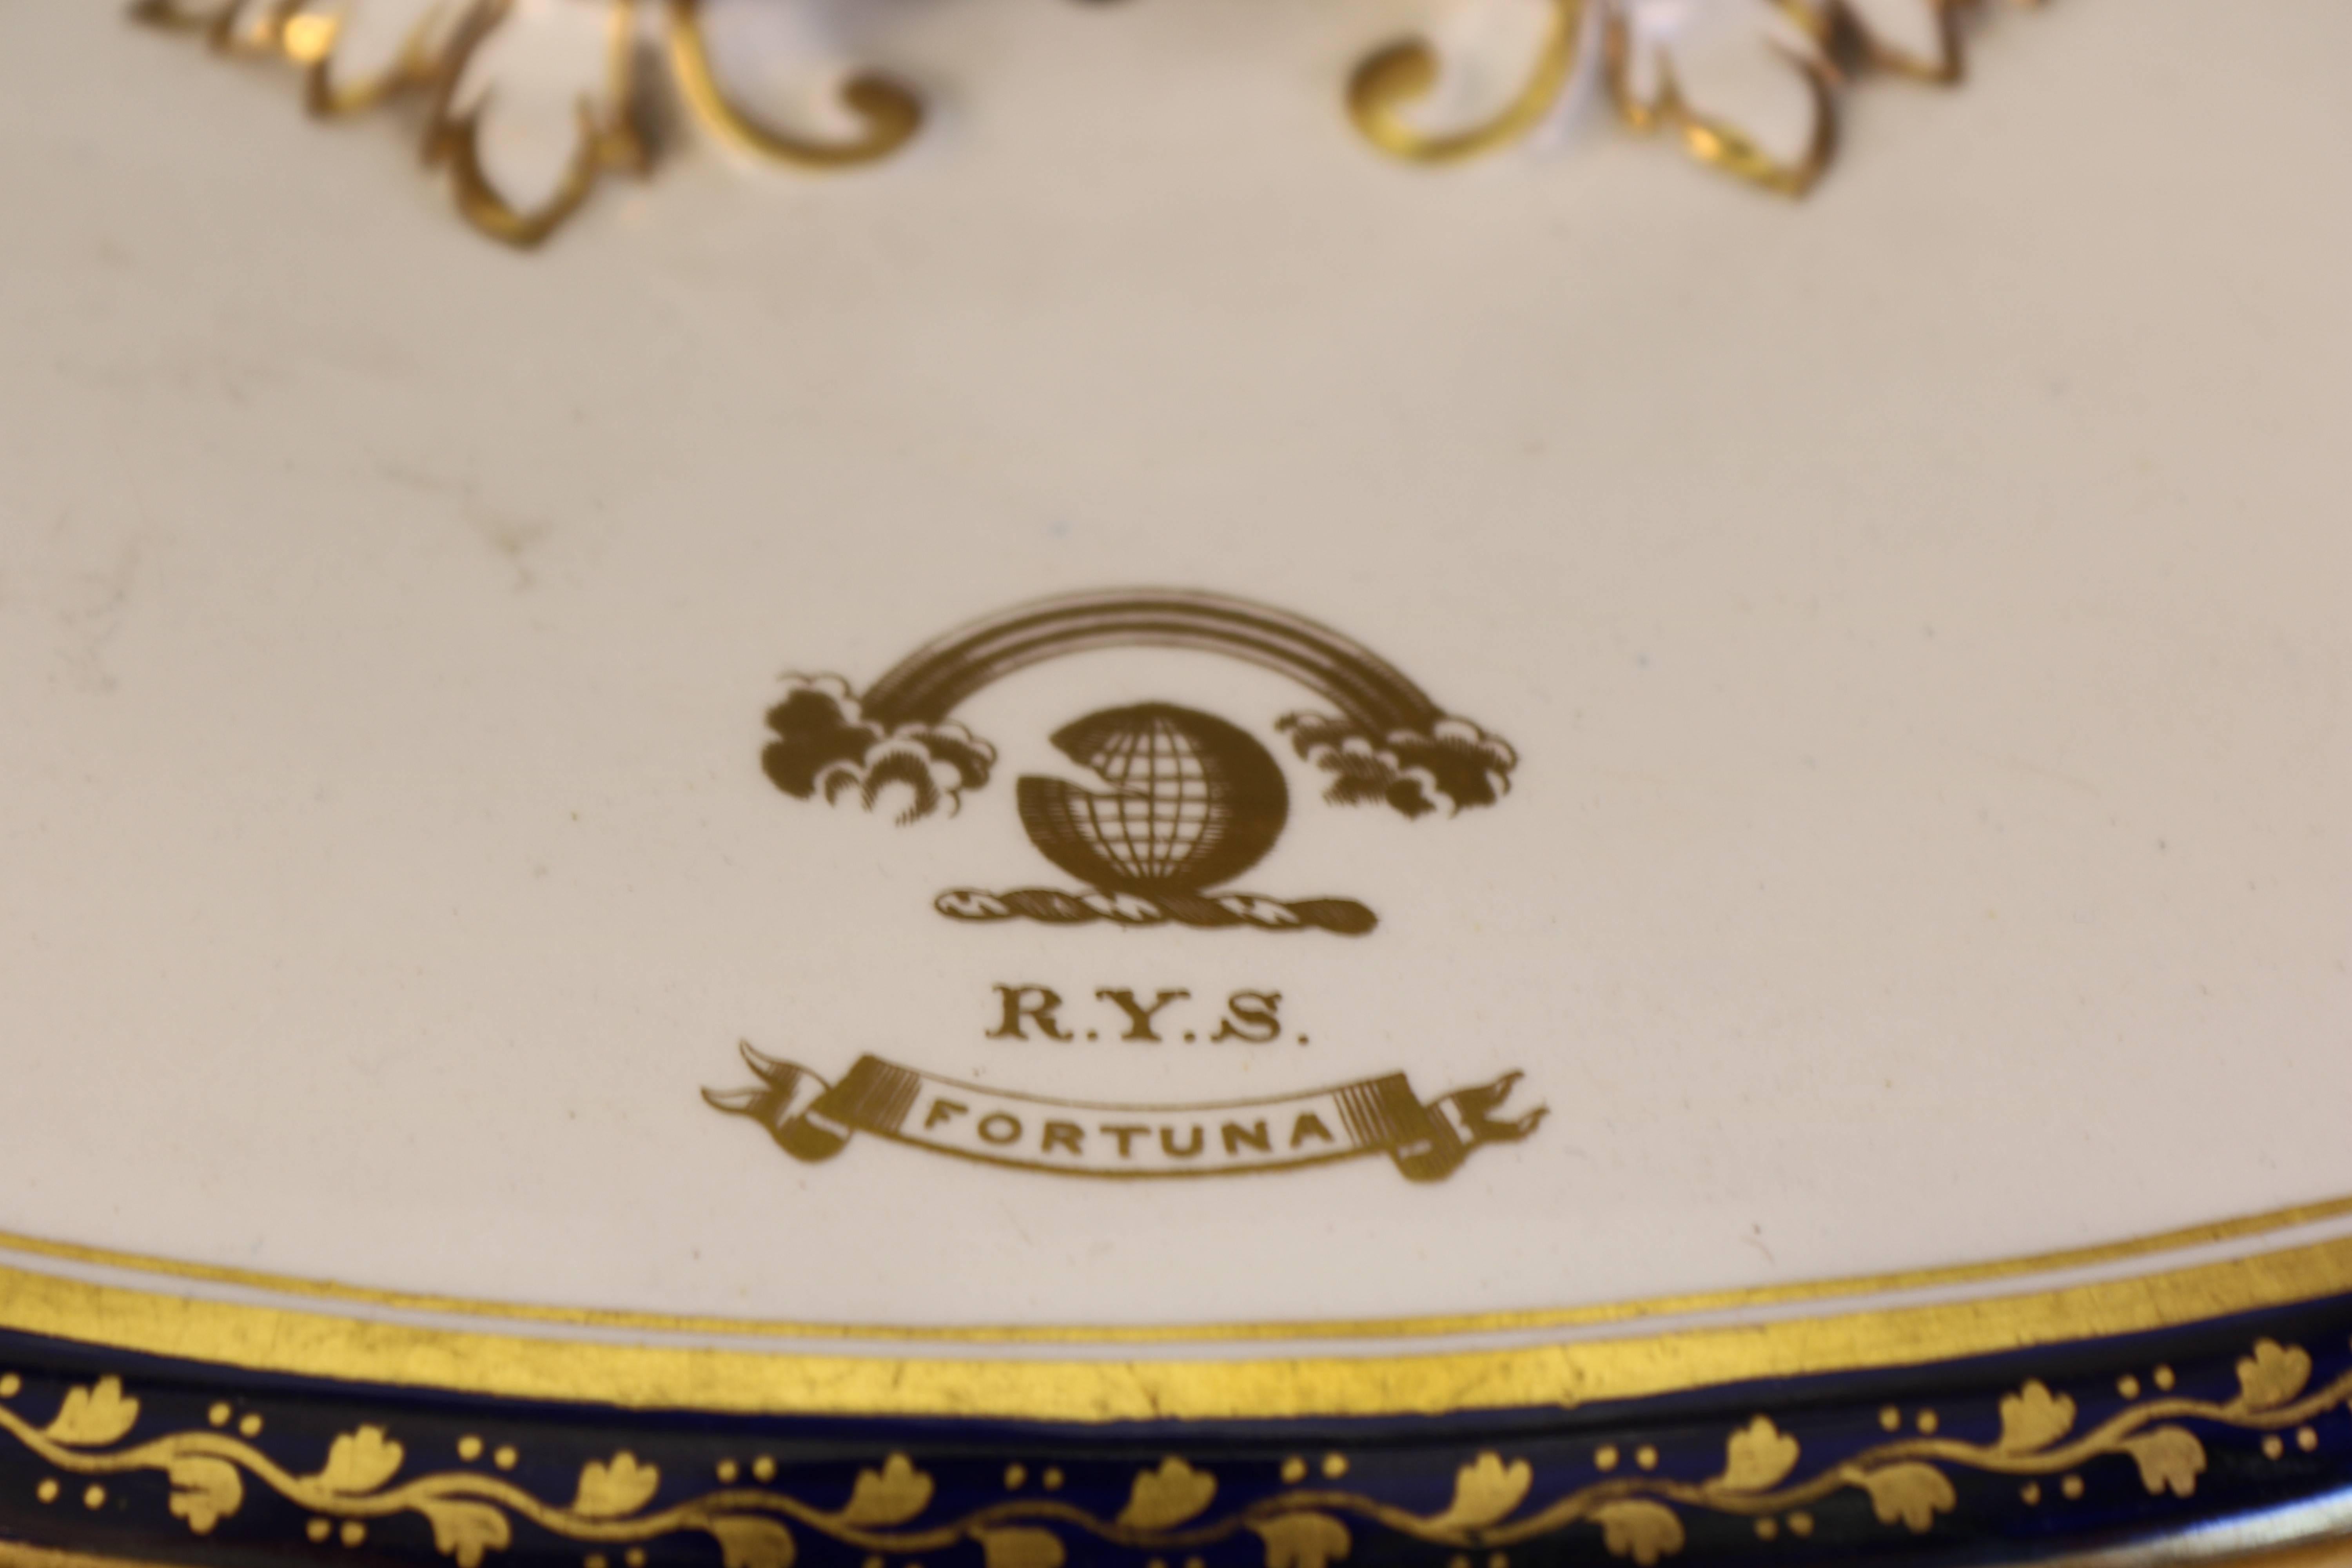 Covered tureen with cover and raised bottom decorated with "RYS Fortuna" on a gold leaf banner. The RYS Fortuna was a wooden schooner built for Adrian Elias Hope (1845-1919) by G. Inman at Lymington, circa 1876. She was registered at 192